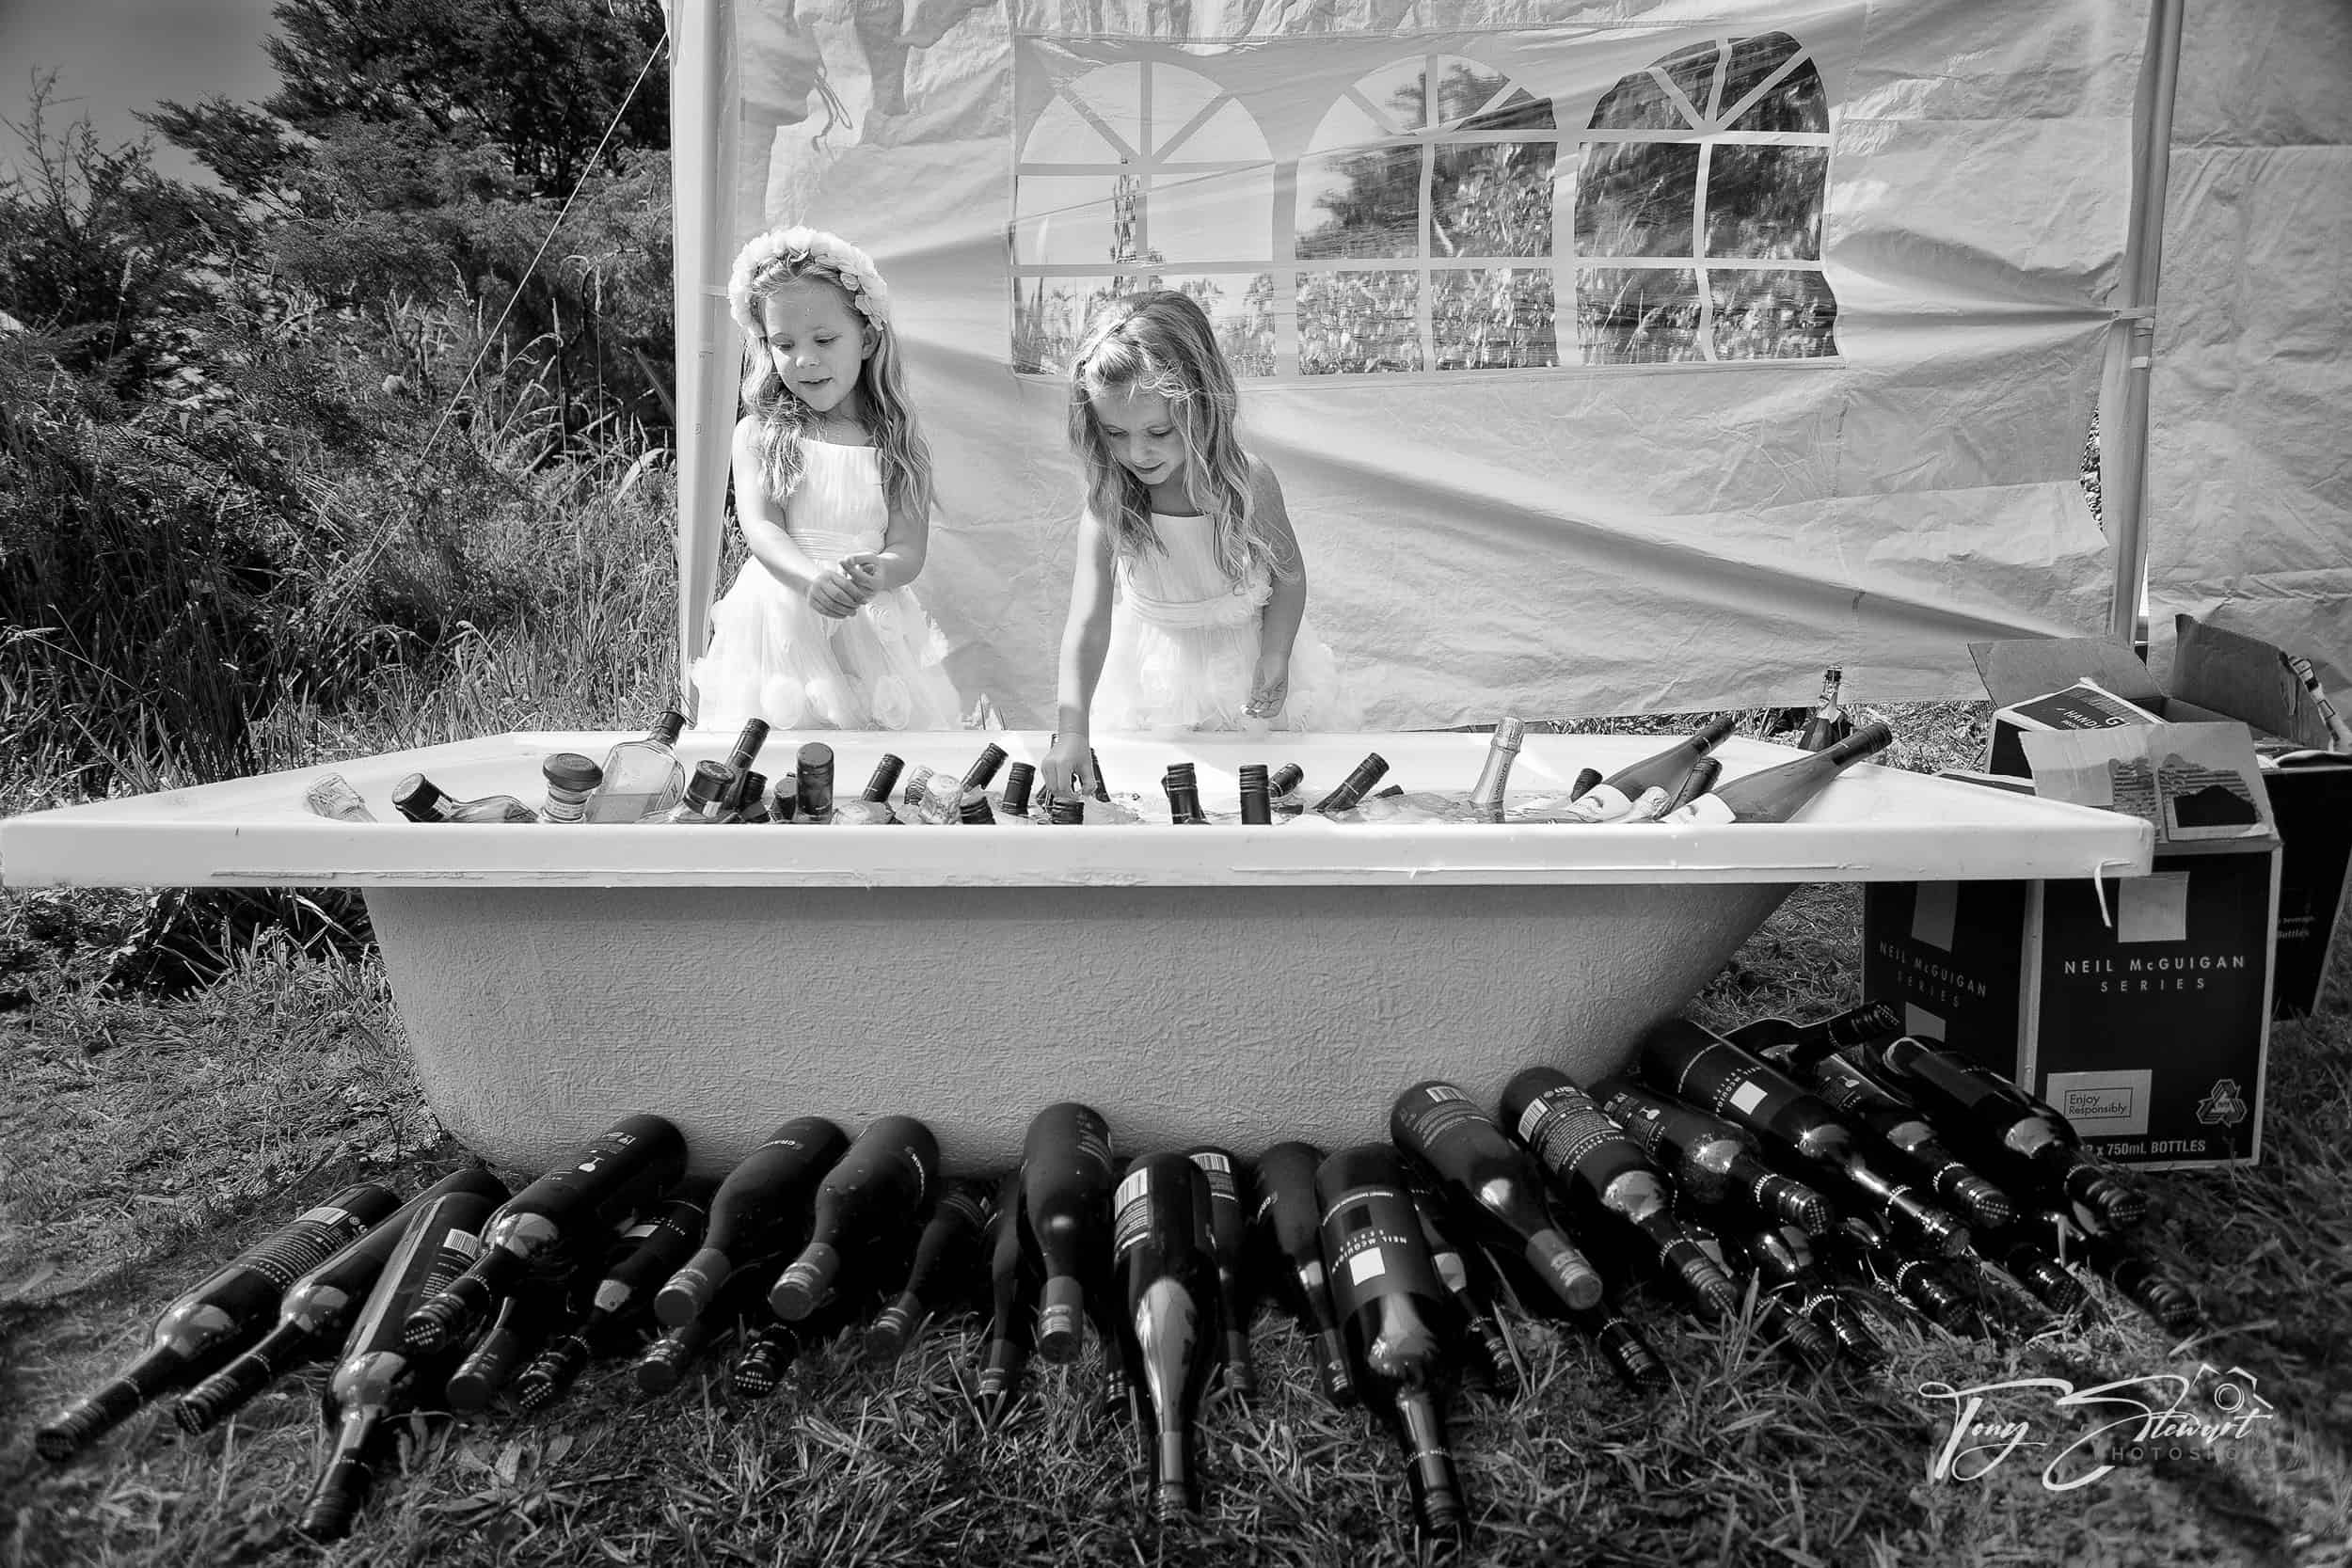 Two young bridesmaids look over bath full of chilled wine.